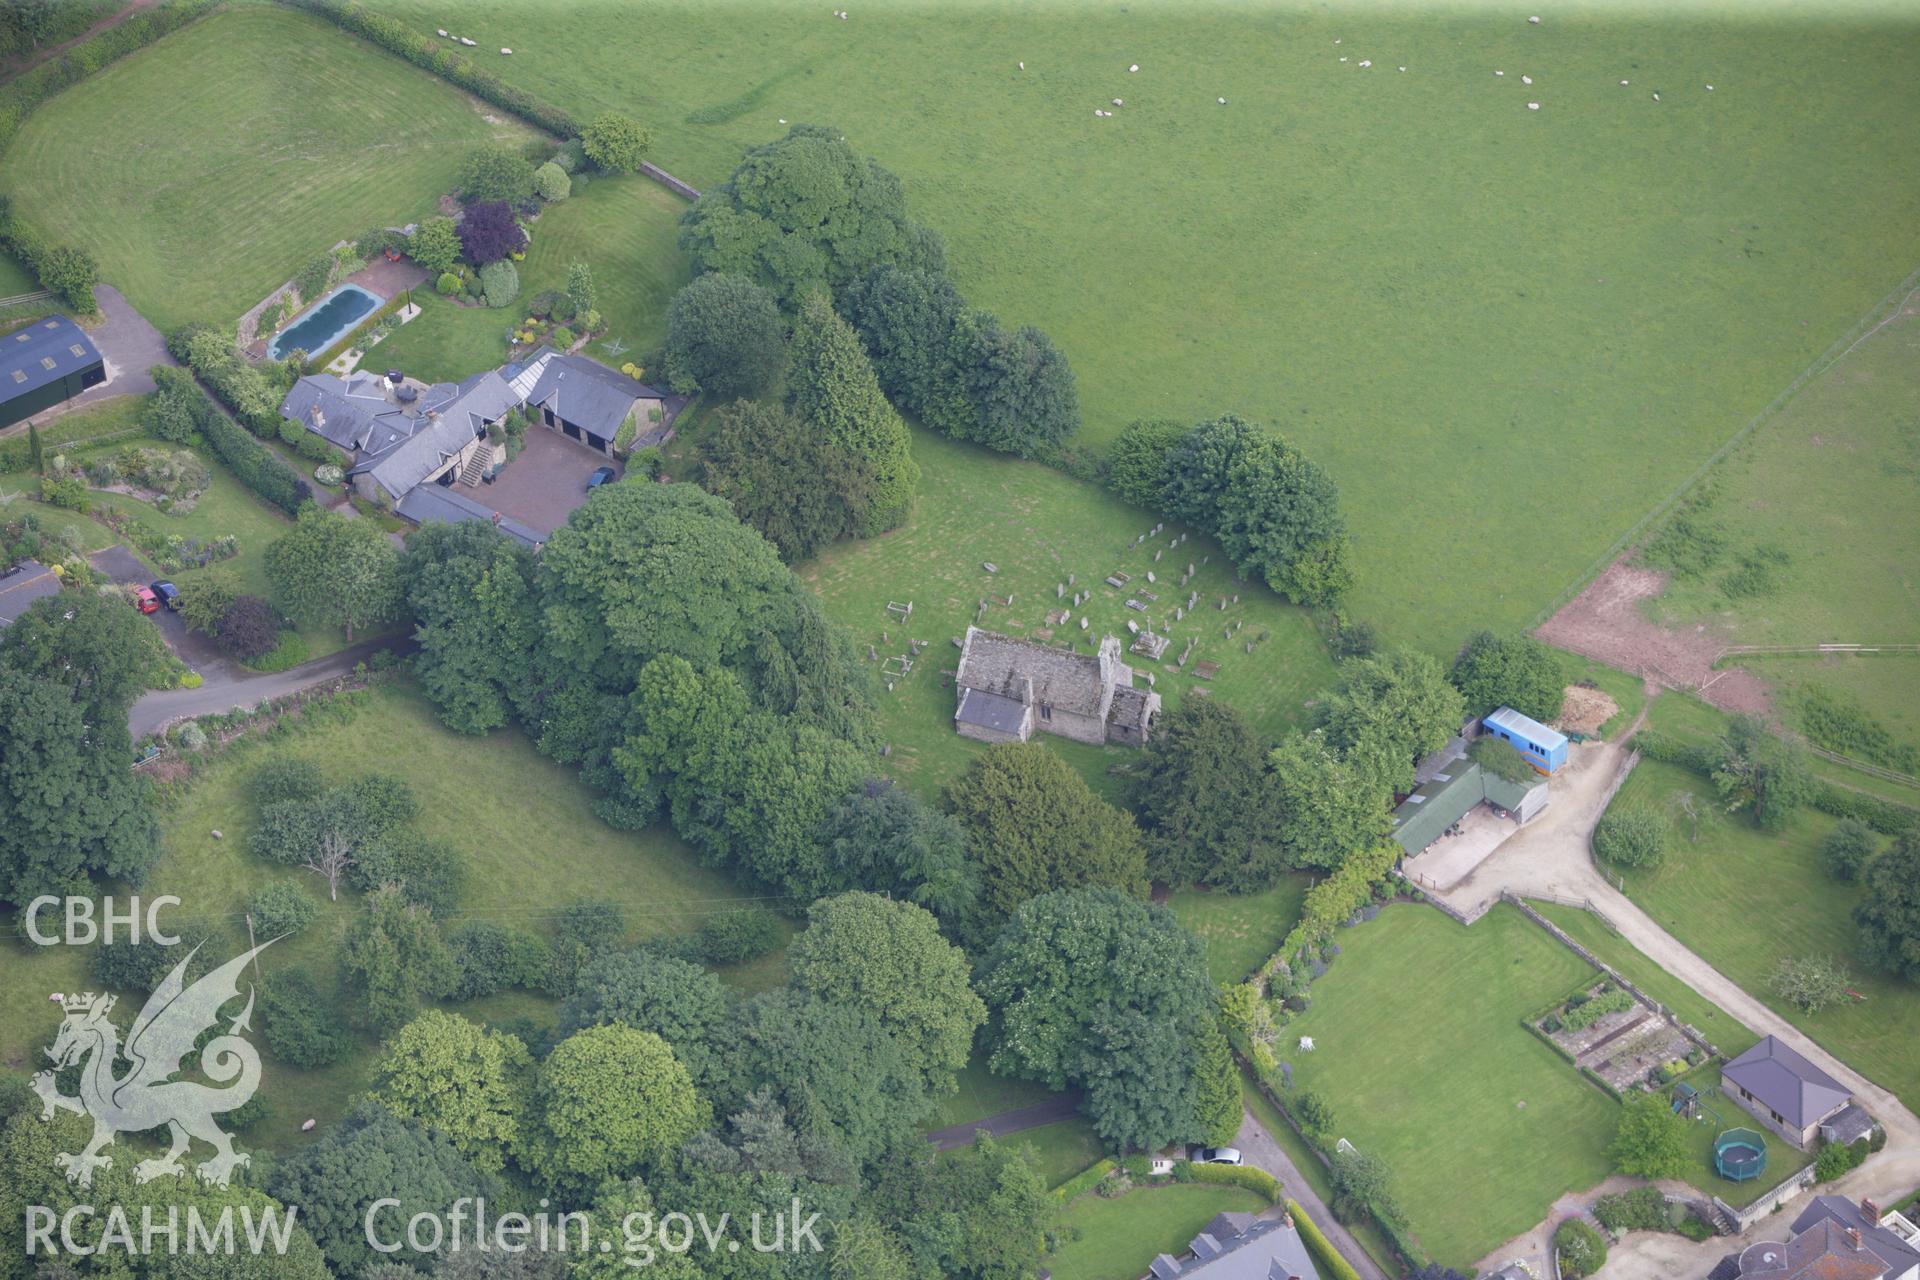 RCAHMW colour oblique aerial photograph of Bettws Newydd Churchyard Cross. Taken on 11 June 2009 by Toby Driver